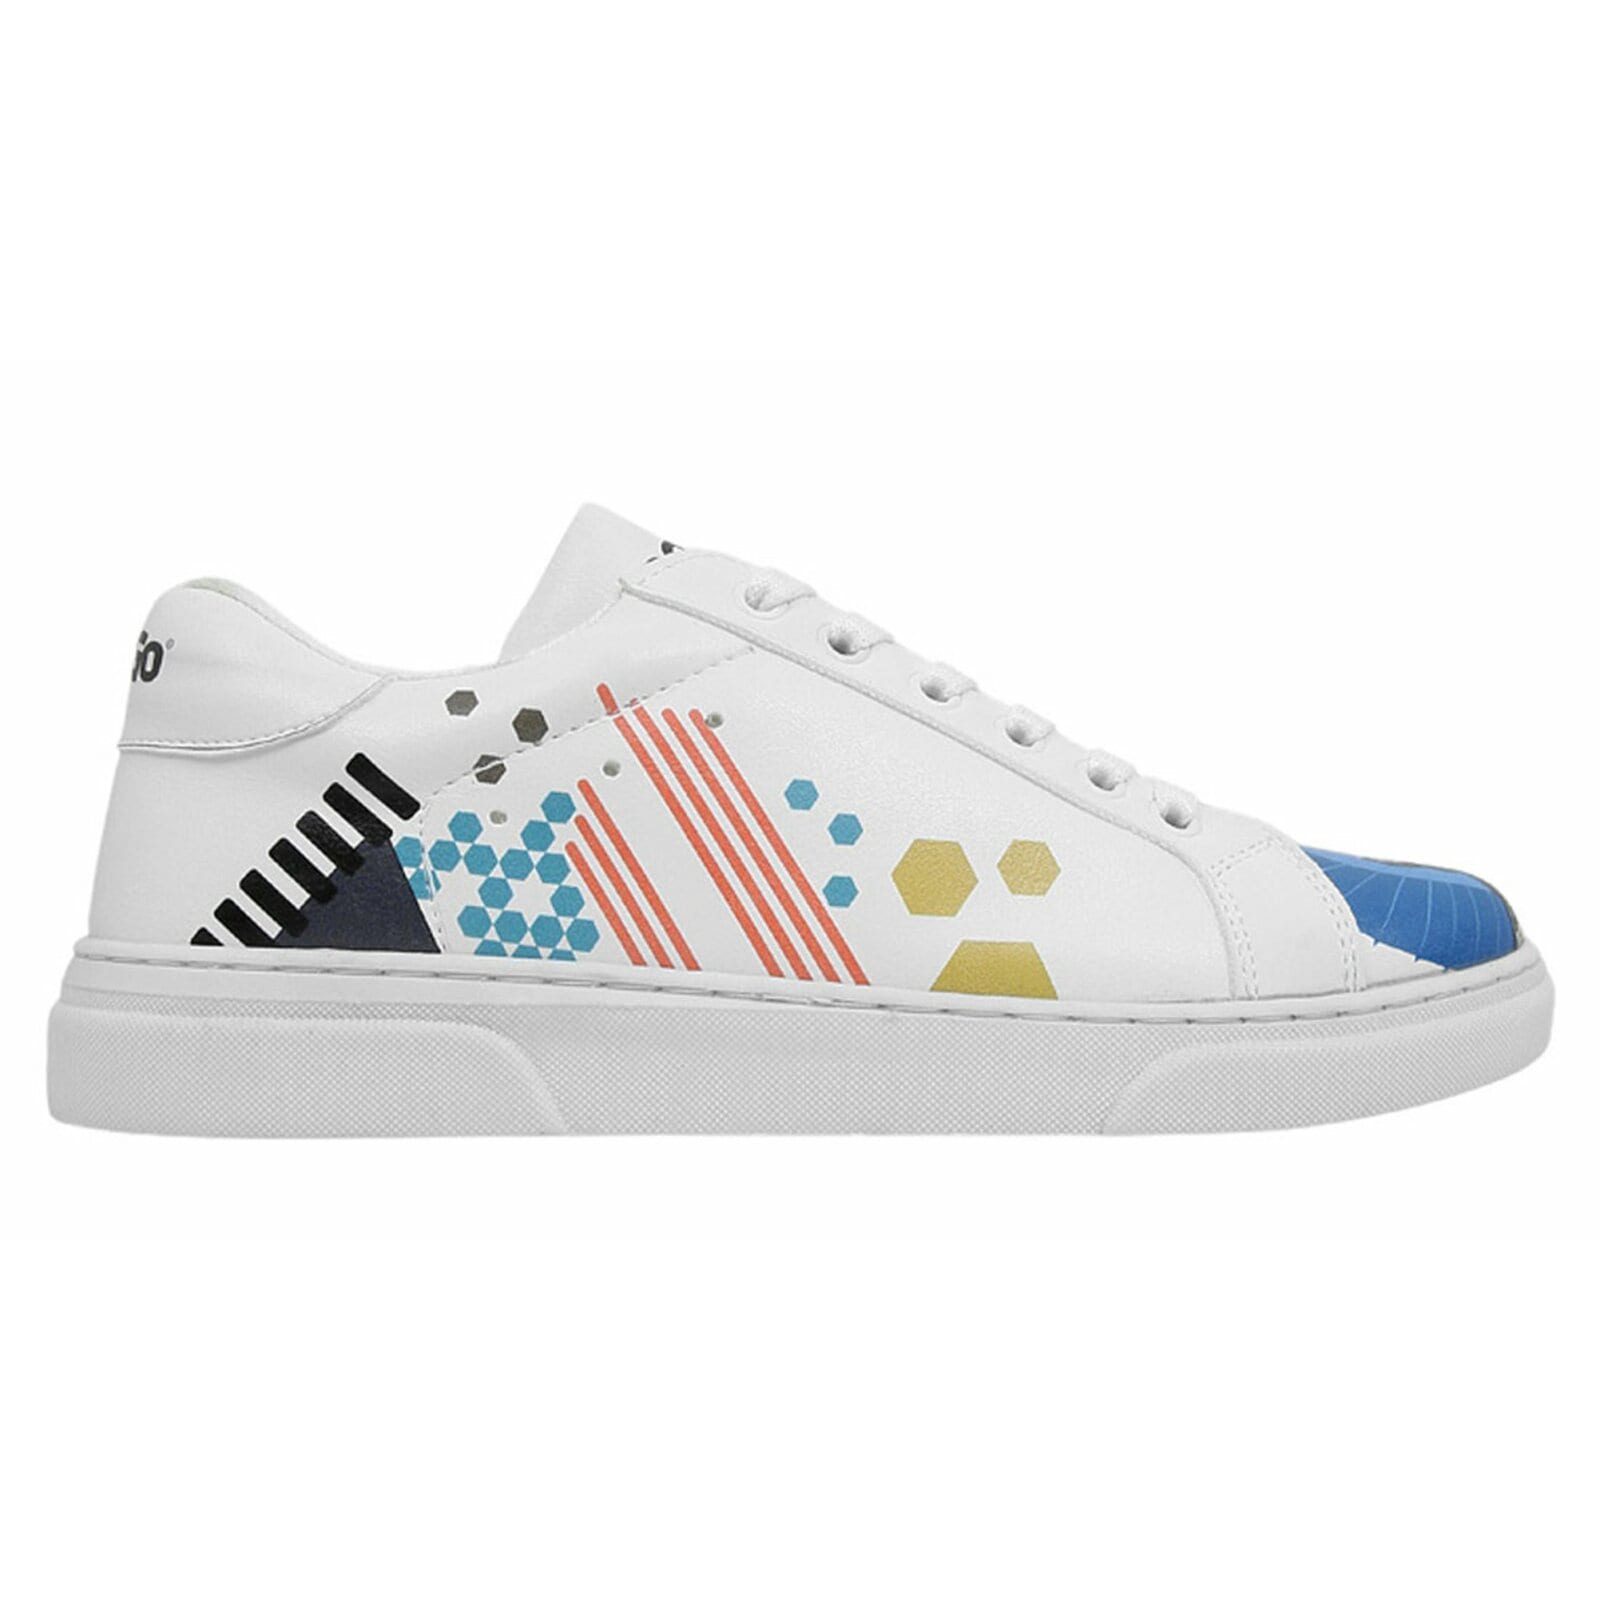 DOGO Sneaker »Bring Your Colours to Life«, Vegan